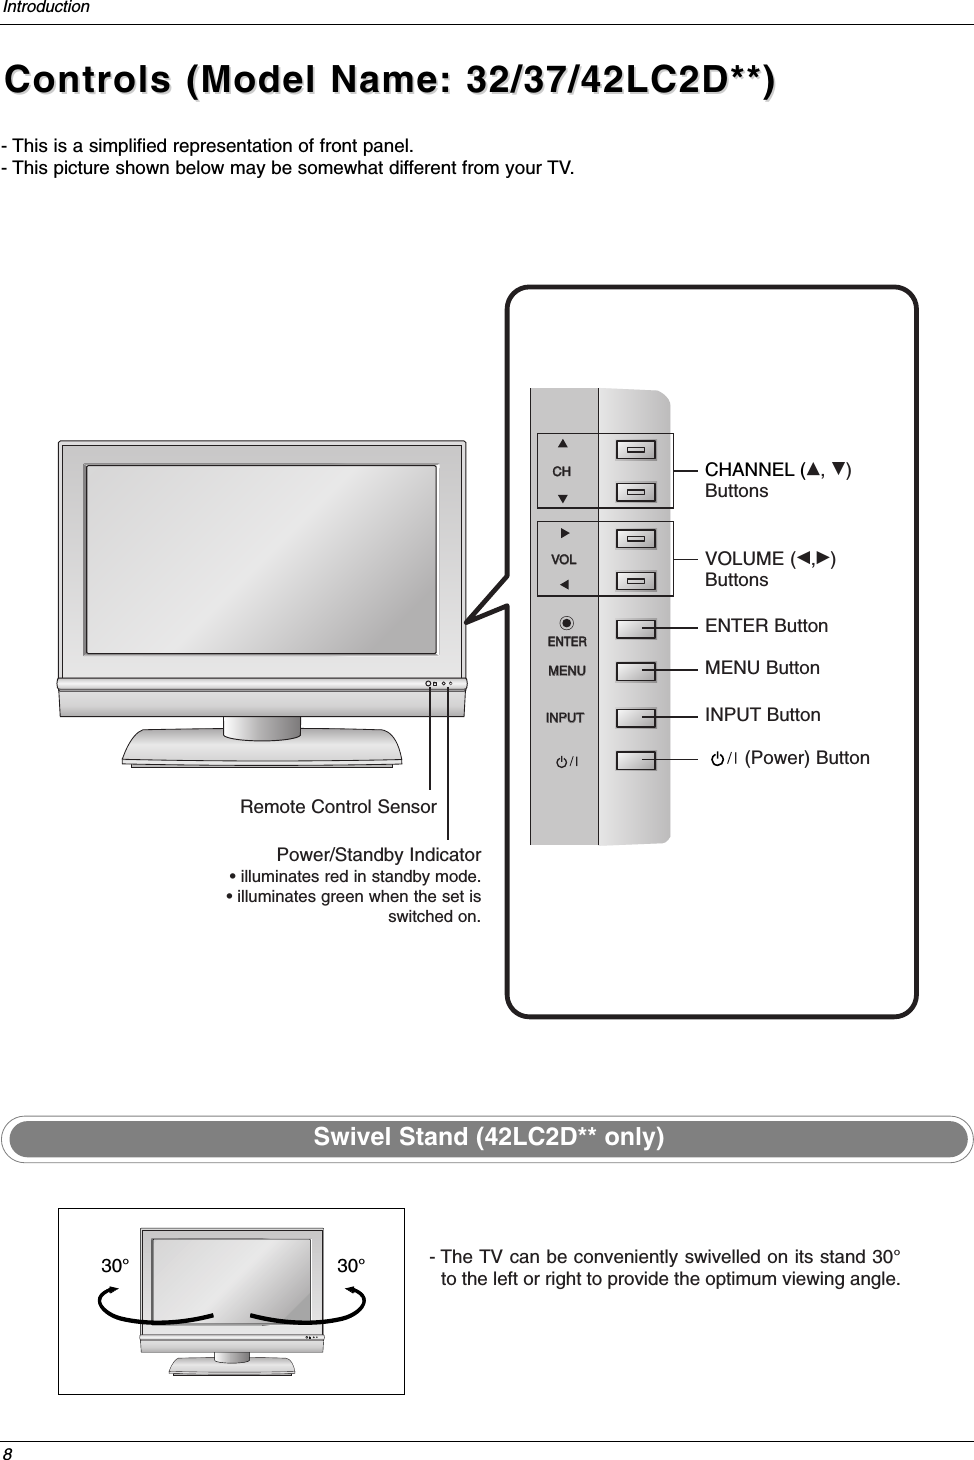 8IntroductionControls Controls (Model Name: 32/37/42LC2D**) (Model Name: 32/37/42LC2D**) - This is a simplified representation of front panel. - This picture shown below may be somewhat different from your TV.RCHCHVOLVOLENTERENTERMENUMENUINPUTINPUTCHANNEL (D, E)ButtonsVOLUME (F,G)ButtonsENTER ButtonMENU ButtonINPUT Button(Power) ButtonRemote Control SensorPower/Standby Indicator• illuminates red in standby mode.• illuminates green when the set isswitched on.- The TV can be conveniently swivelled on its stand 30°to the left or right to provide the optimum viewing angle.Swivel Stand (42LC2D** only)R30°30°